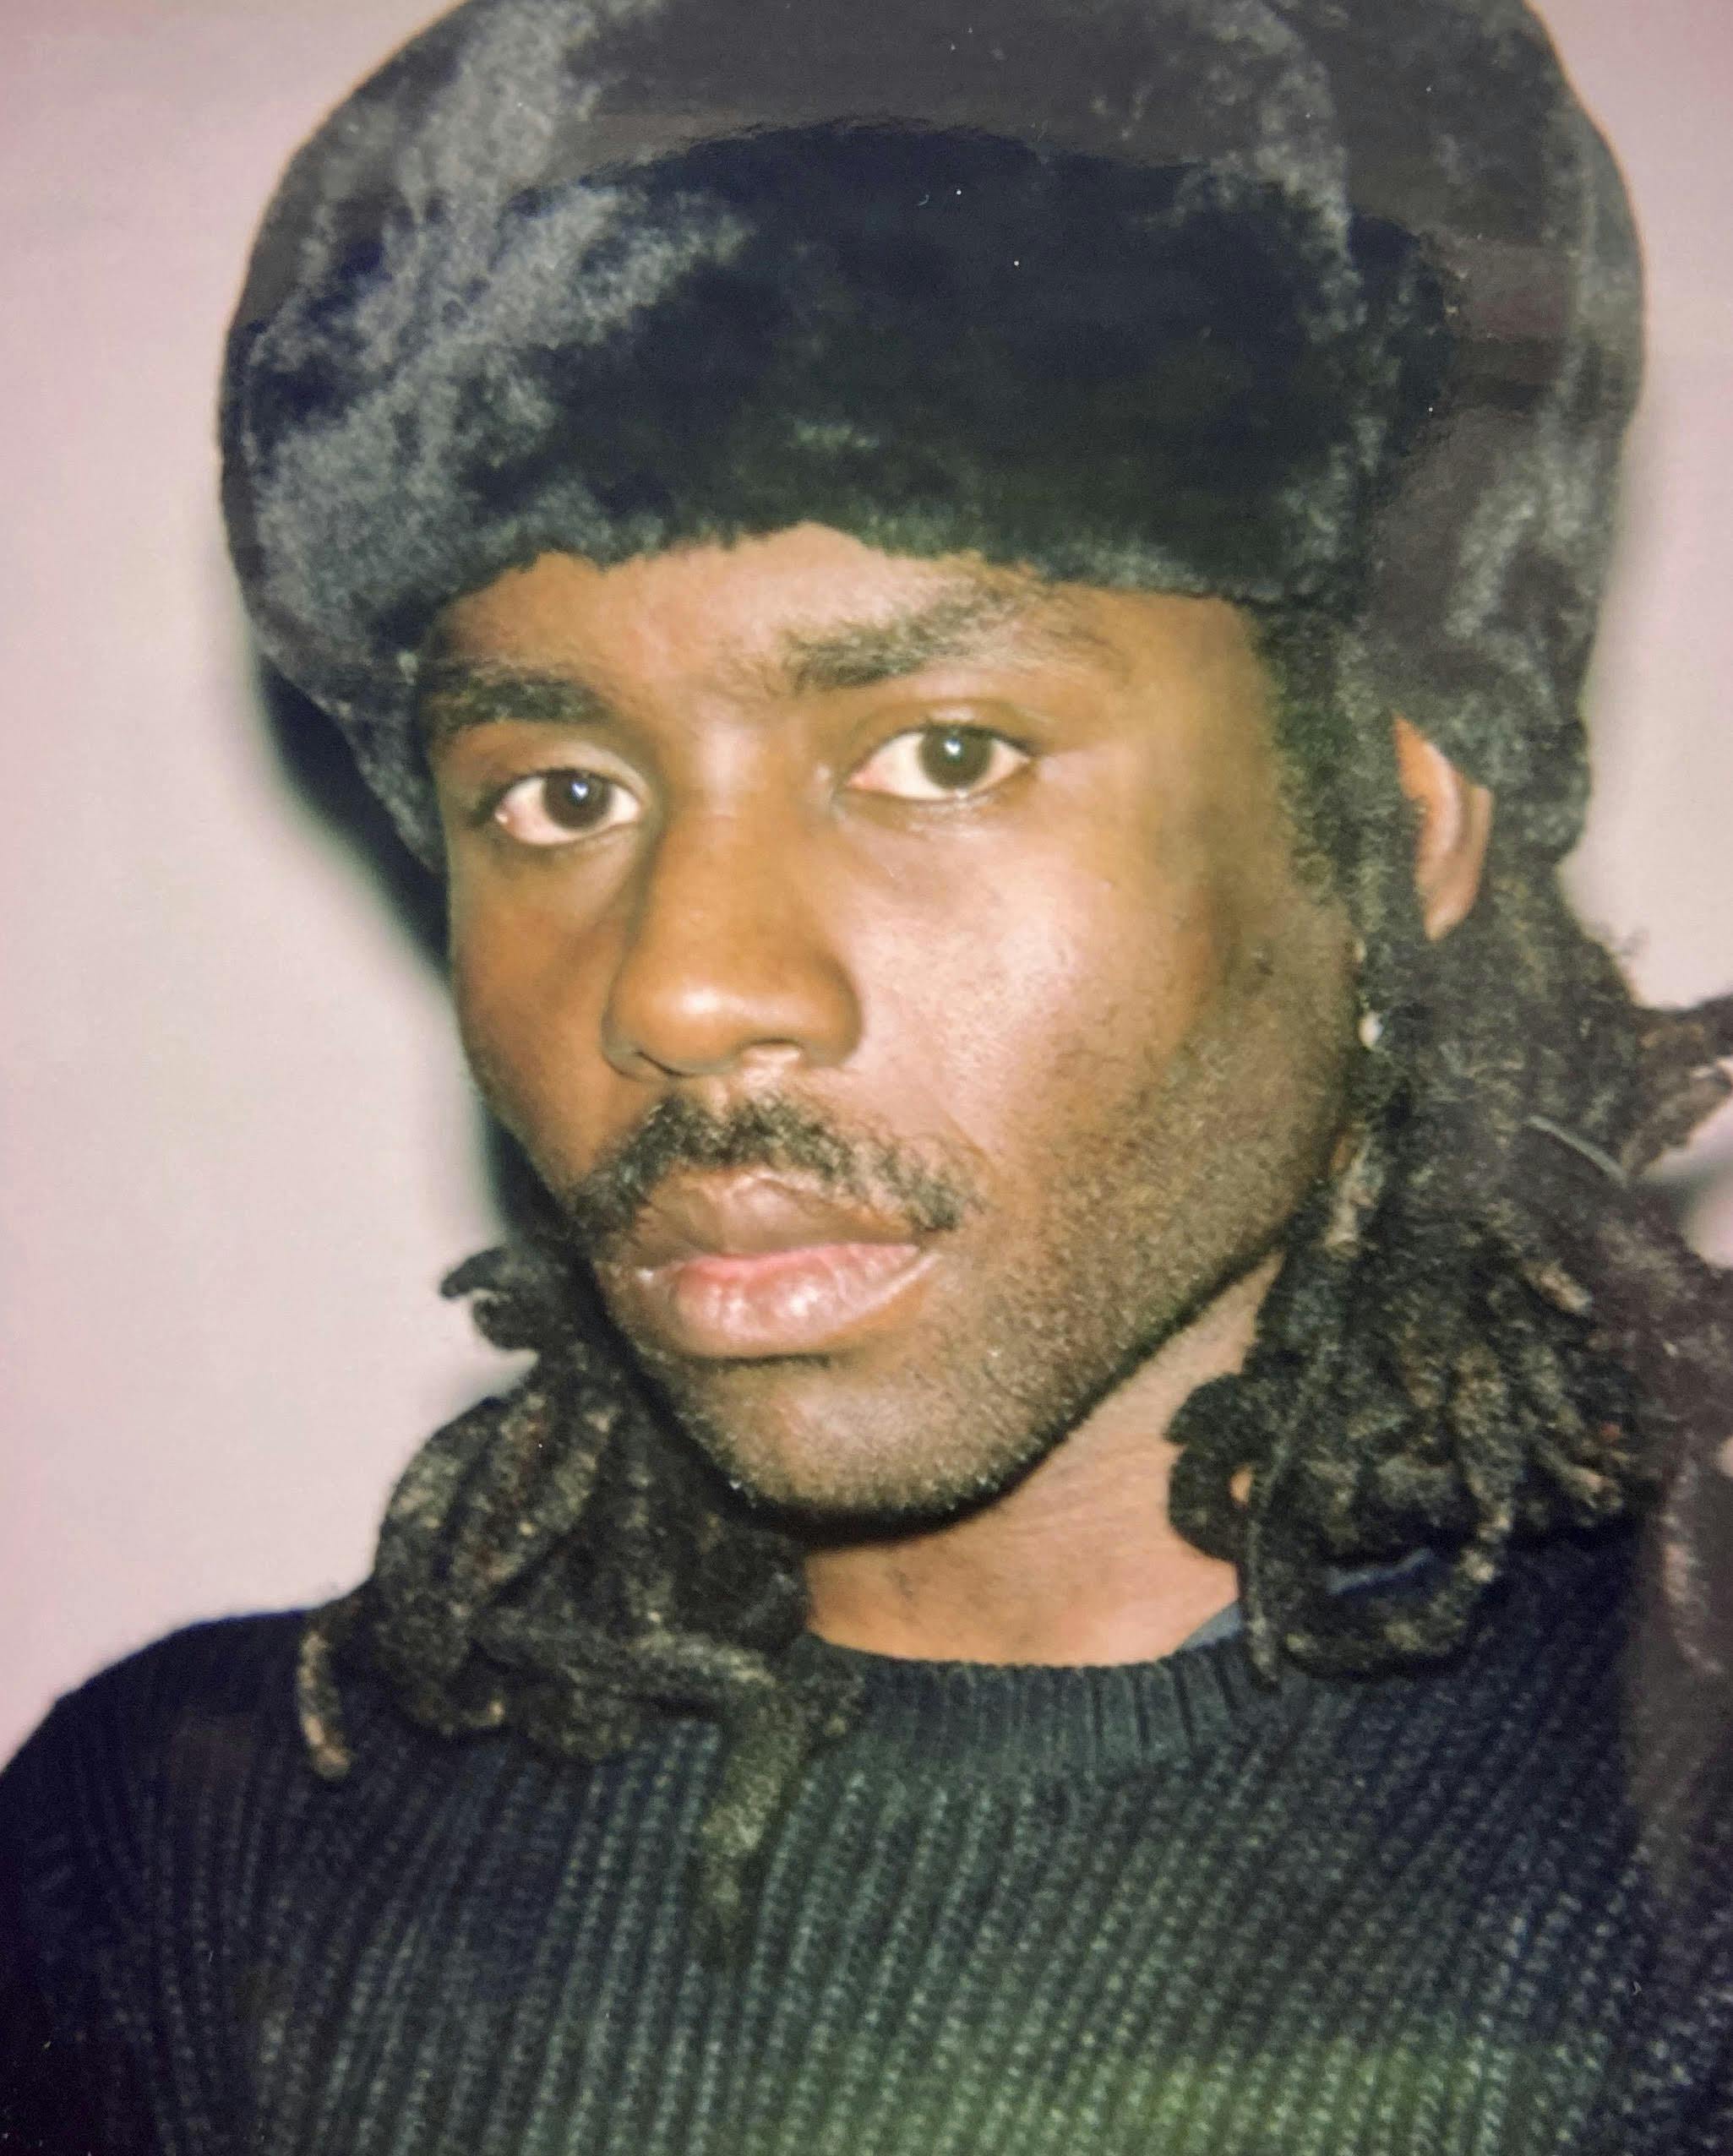 Dev Hynes wears a dark shirt and furry dark hat. He has a mustache and hair to his shoulders.